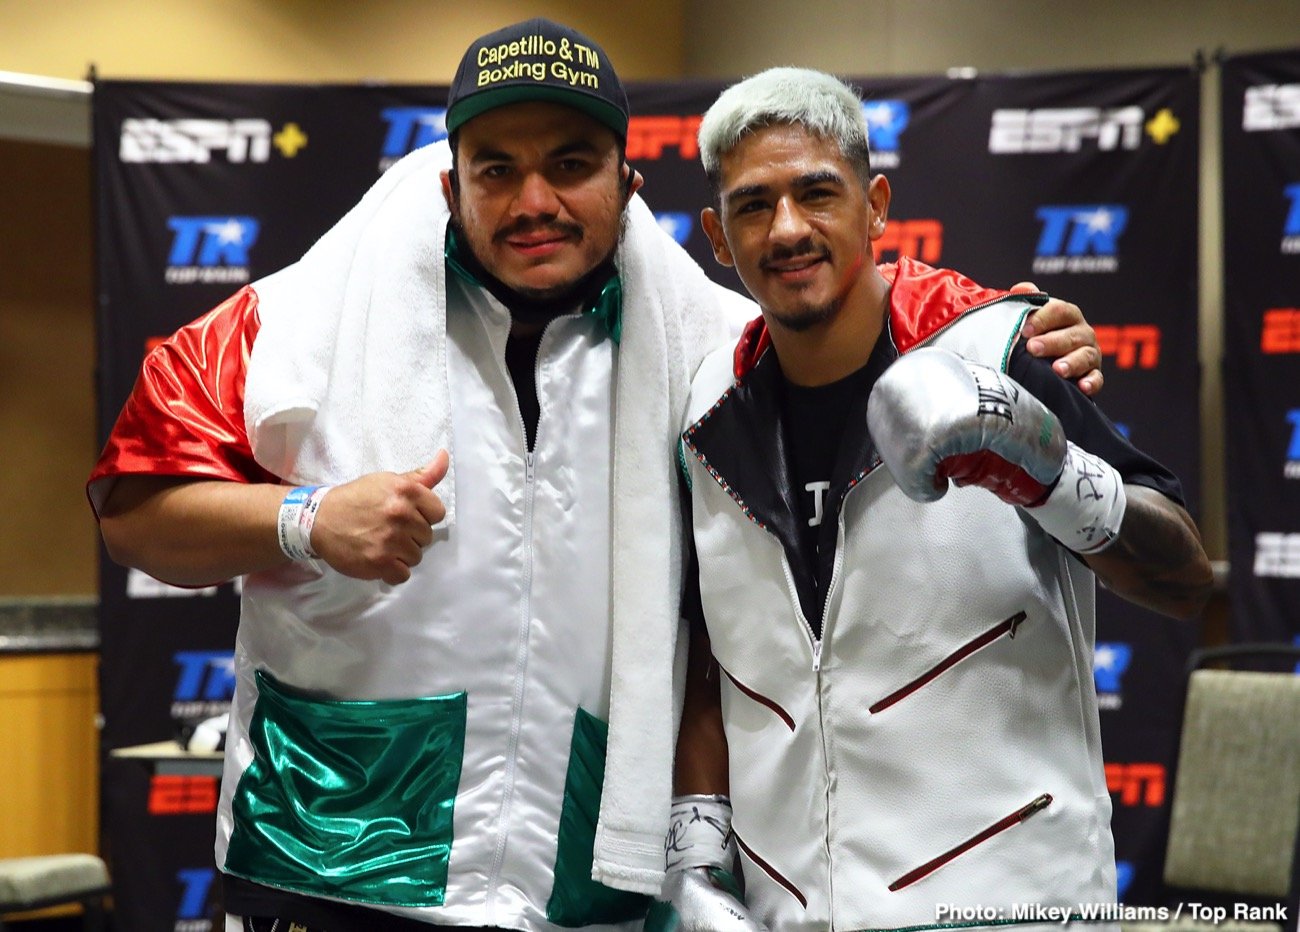 RESULTS: Jessie Magdaleno beats Yenifel Vicente by 10th round DQ